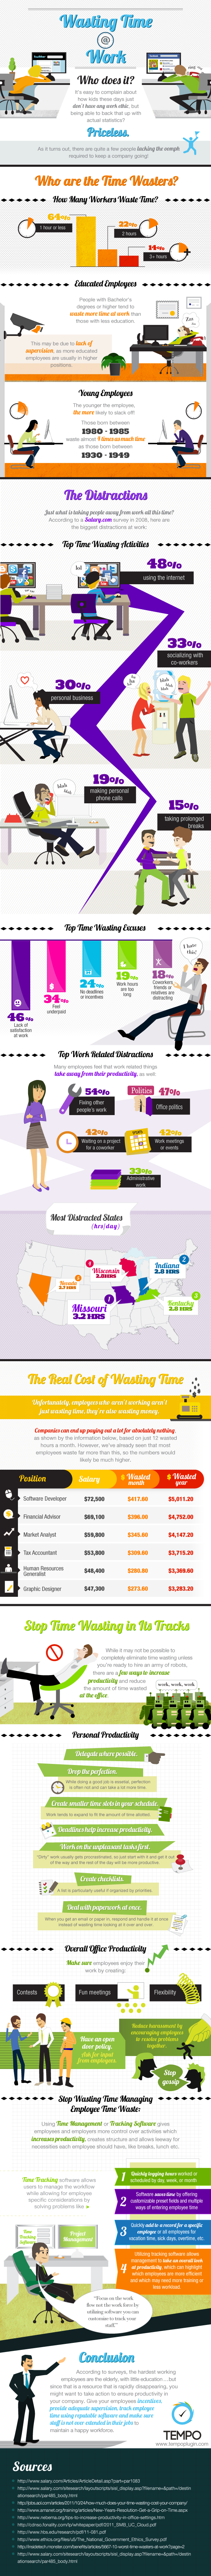 wasting time at work time tracking infographic Work: Who are the time wasters, Young & Educated